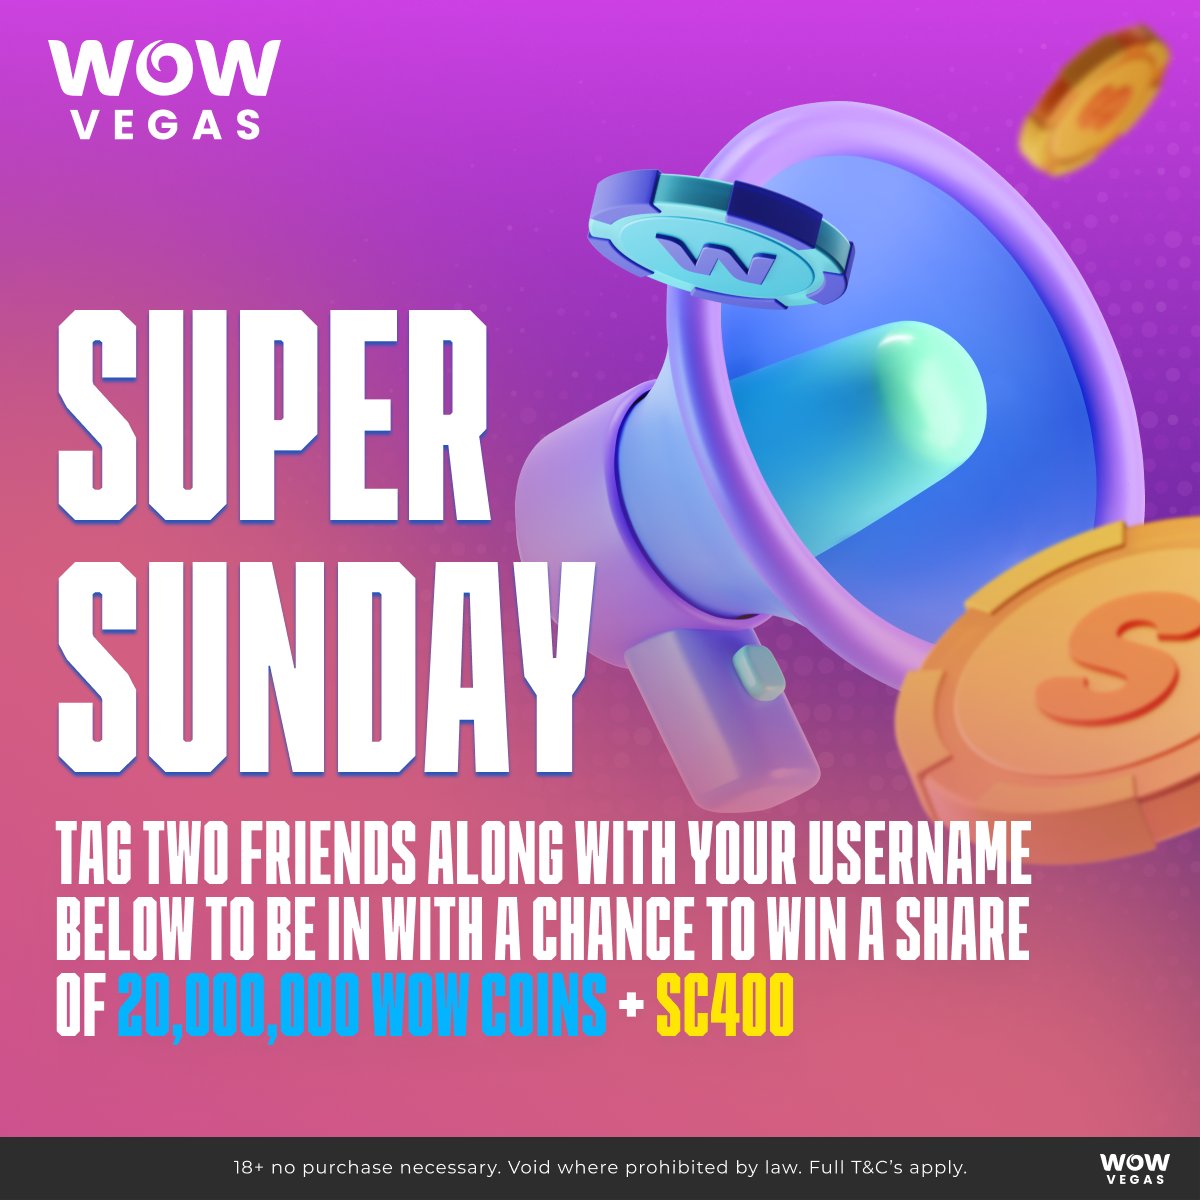 Super Sunday time! 🎉 Ready to win big with 1,000,000 WOW Coins and SC 20 for free? Simply tag two friends below and share your username! 🌟 We'll randomly select 20 lucky winners from our social media community and credit them tomorrow! 🥳